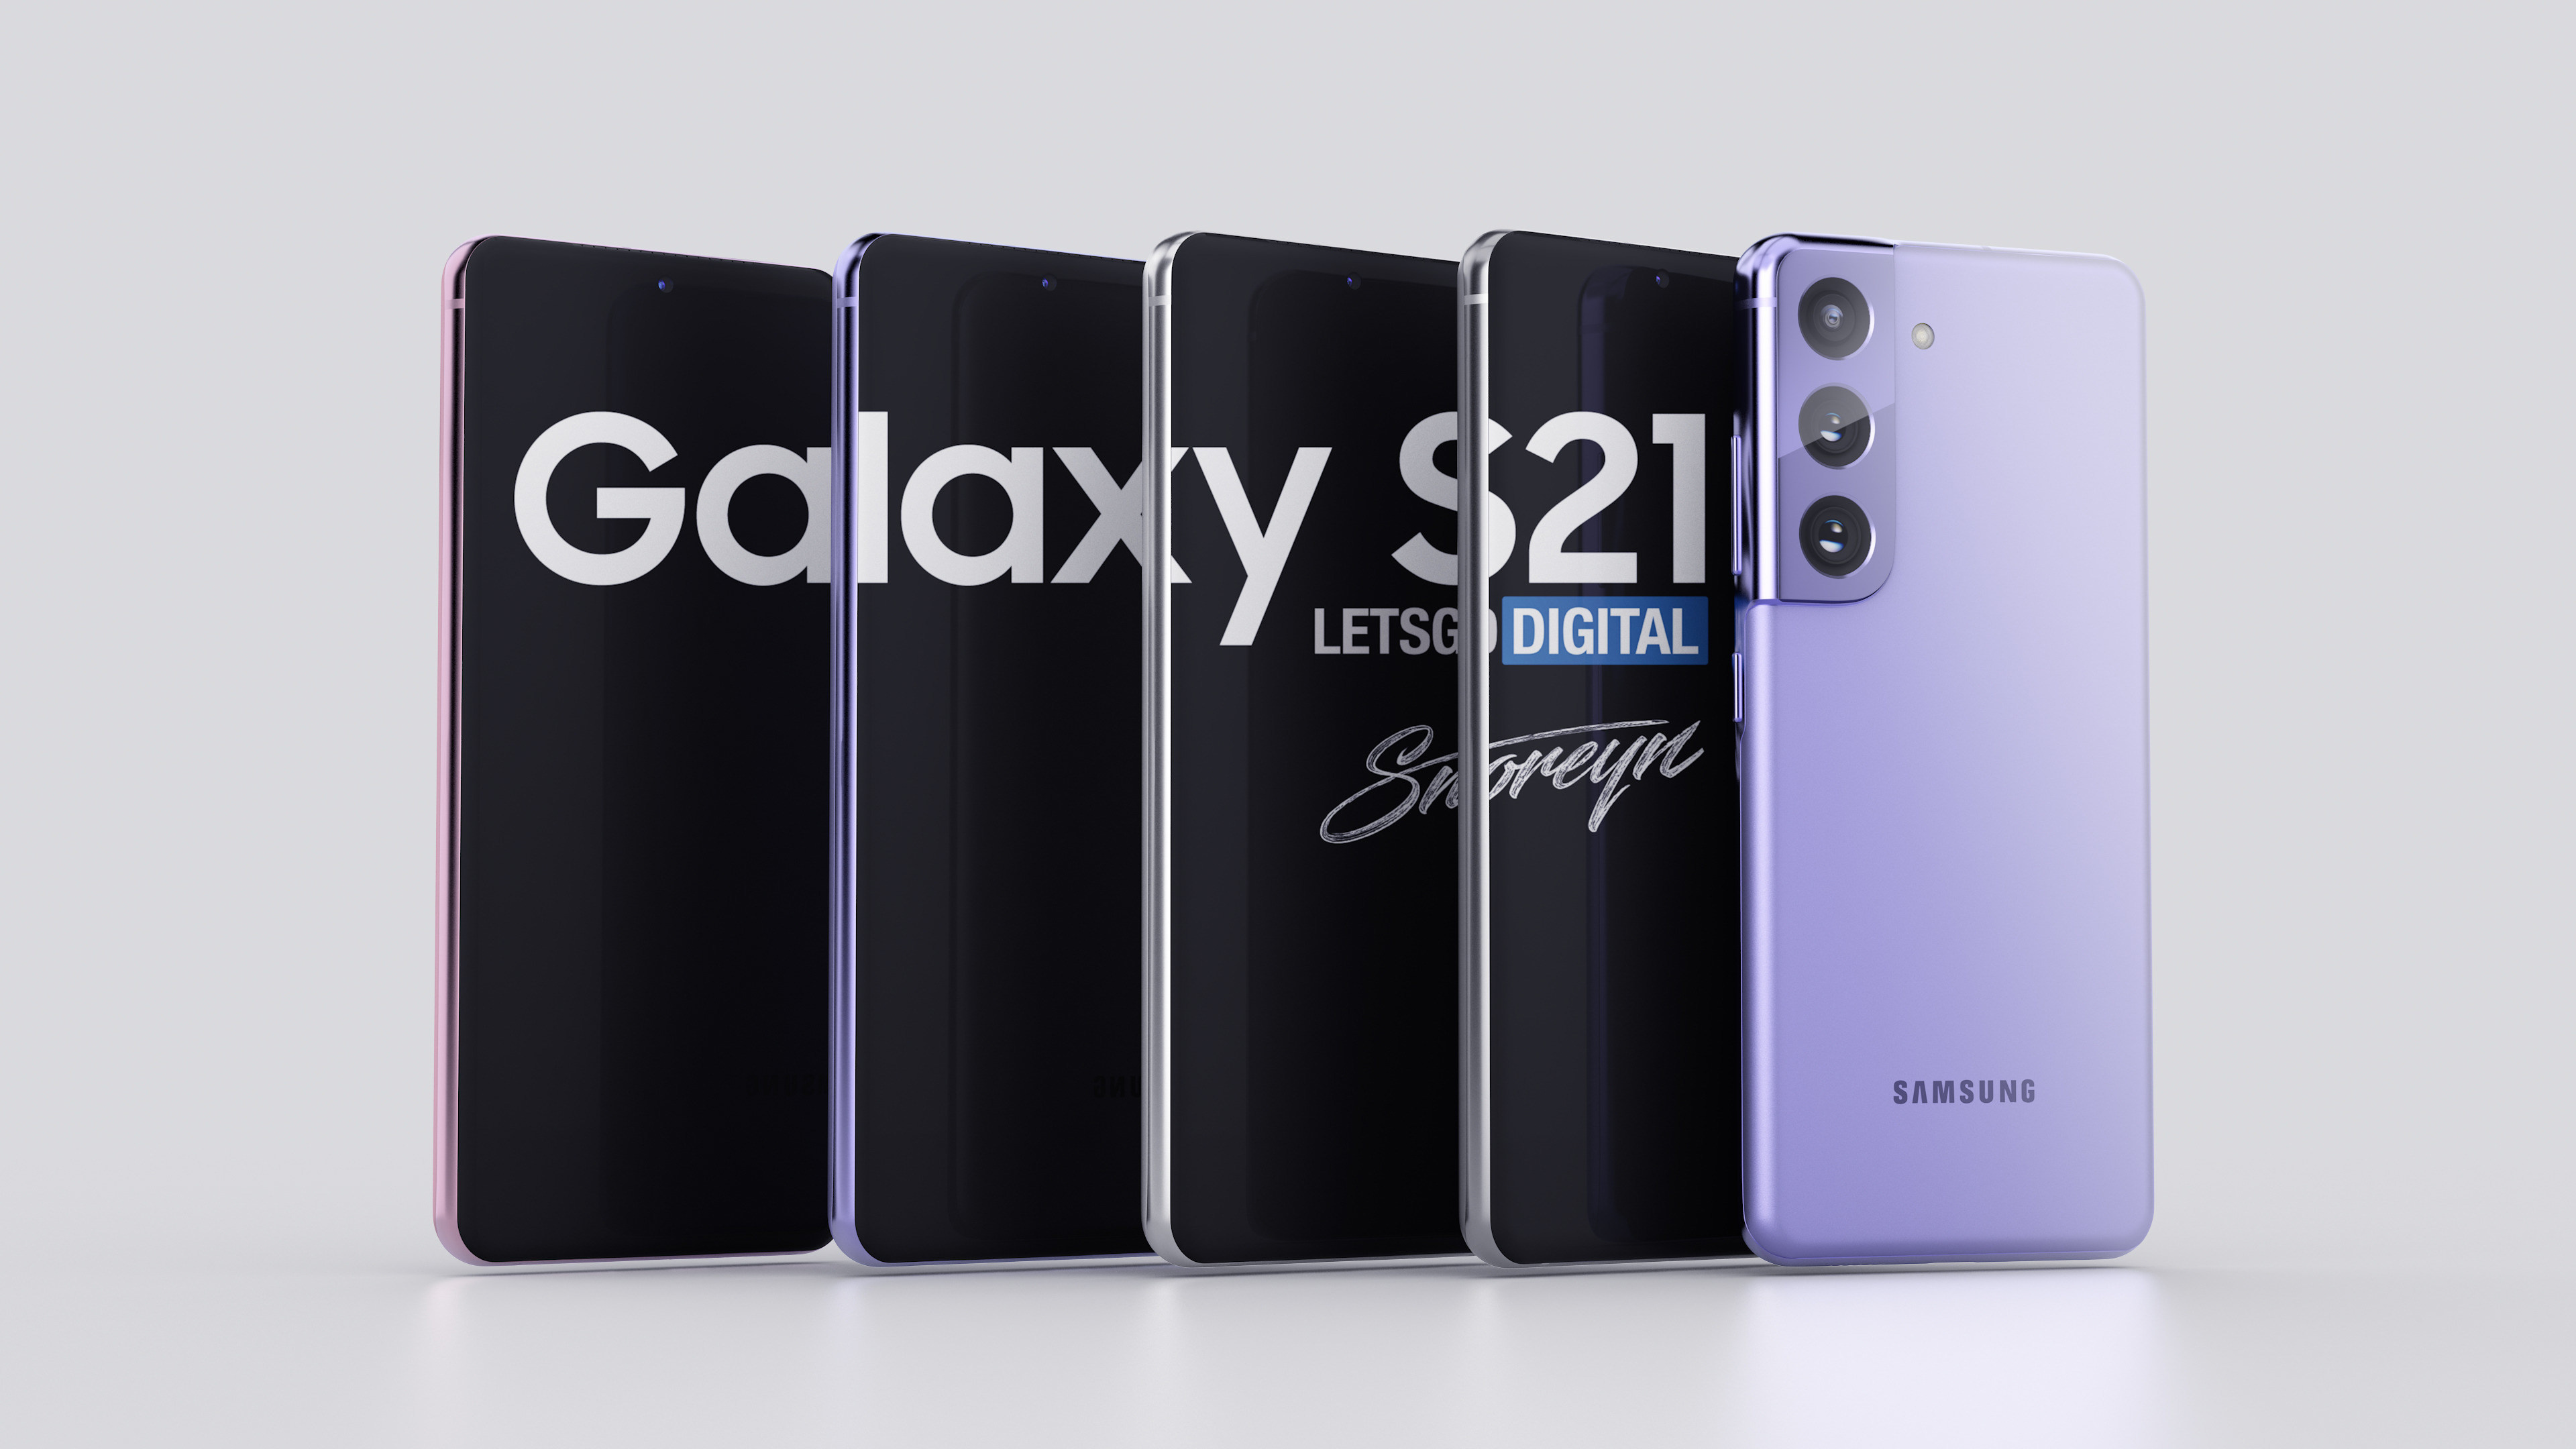 Samsung: Galaxy S21,5G Android smartphone, Announced Jan 2021, 6.2″ display, Exynos 2100 chipset. 3840x2160 4K Background.